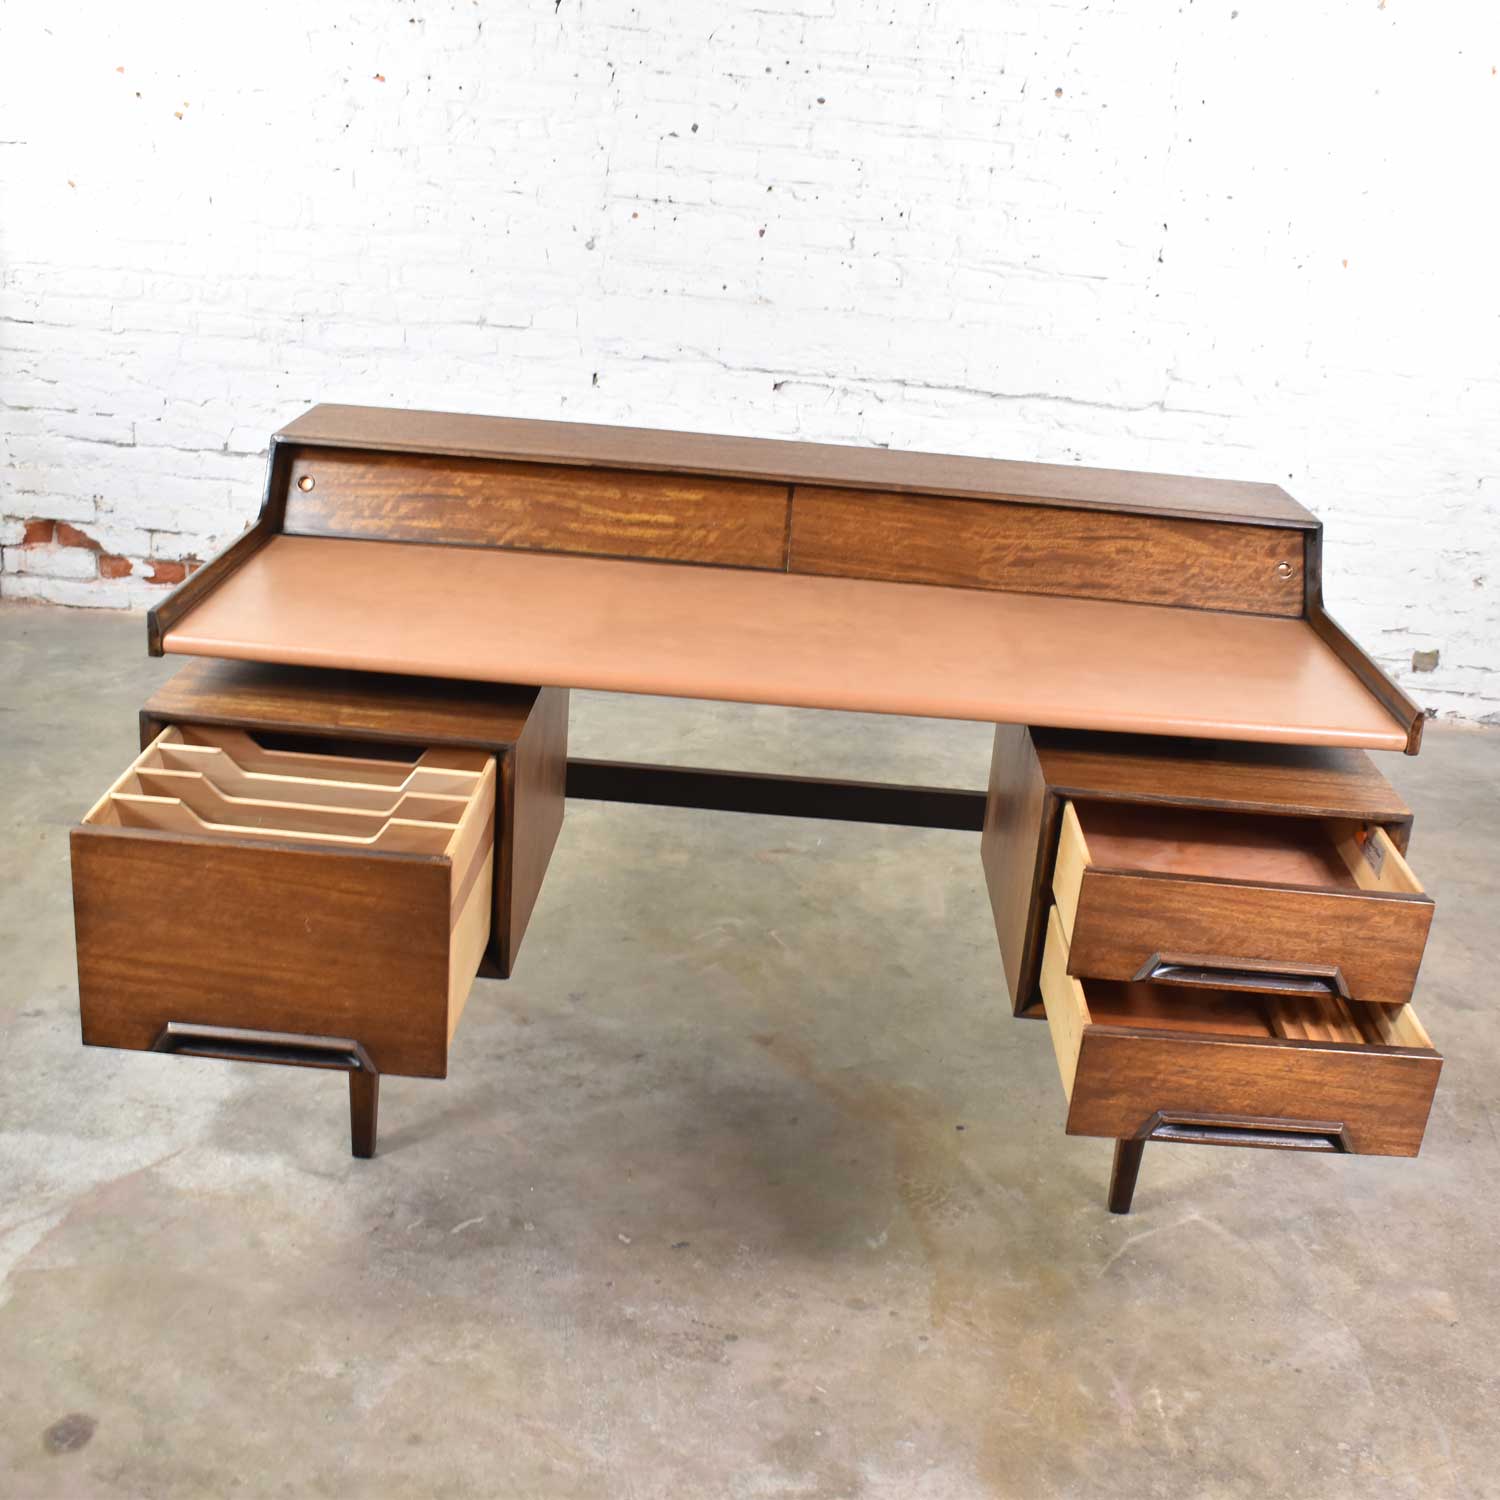 Milo Baughman for Drexel Perspective Mindoro and Faux Leather Floating Top MCM Desk